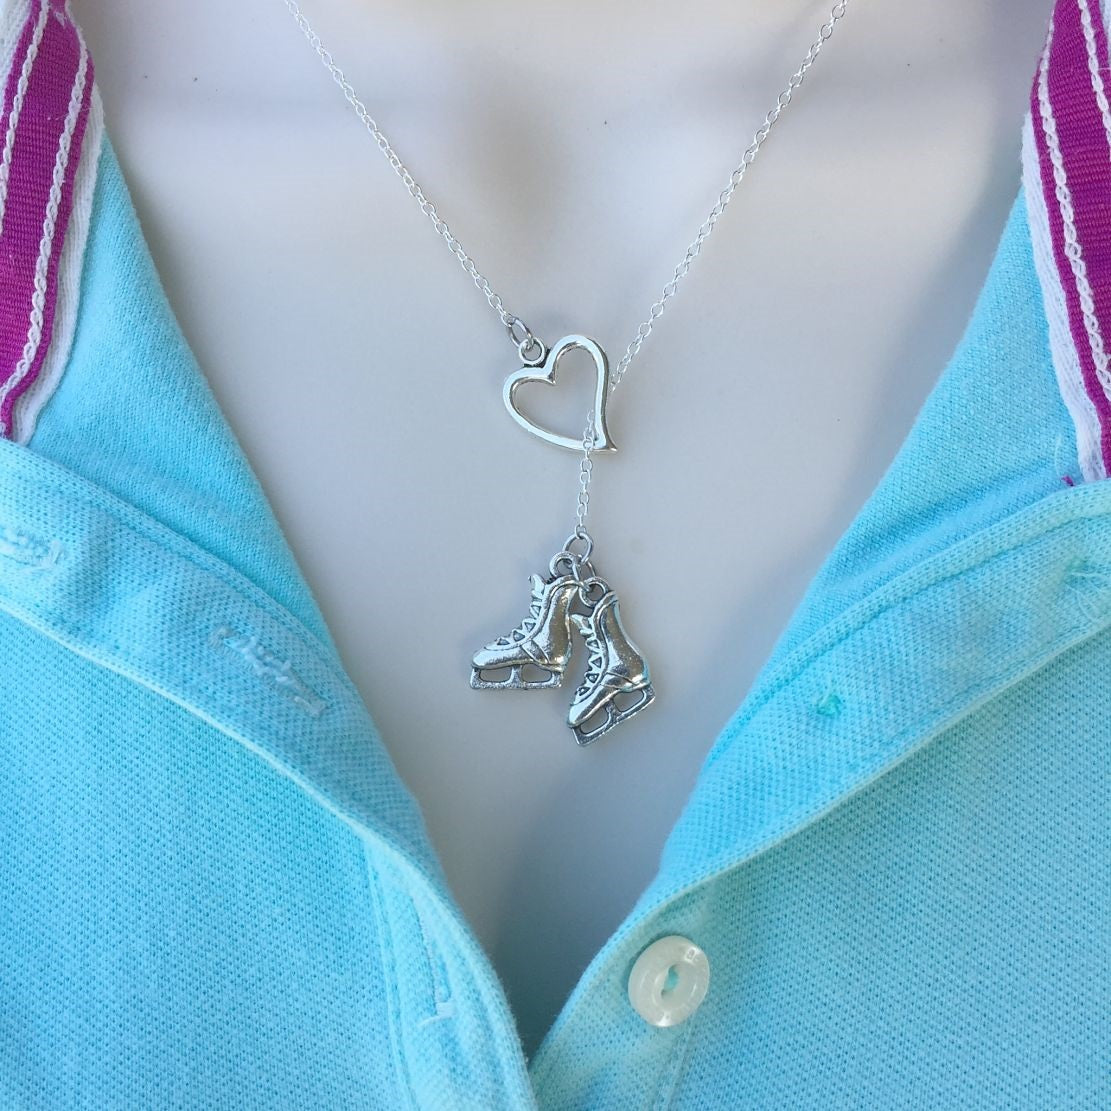 I Love Ice Skating Handcrafted Silver Lariat Y Necklace.